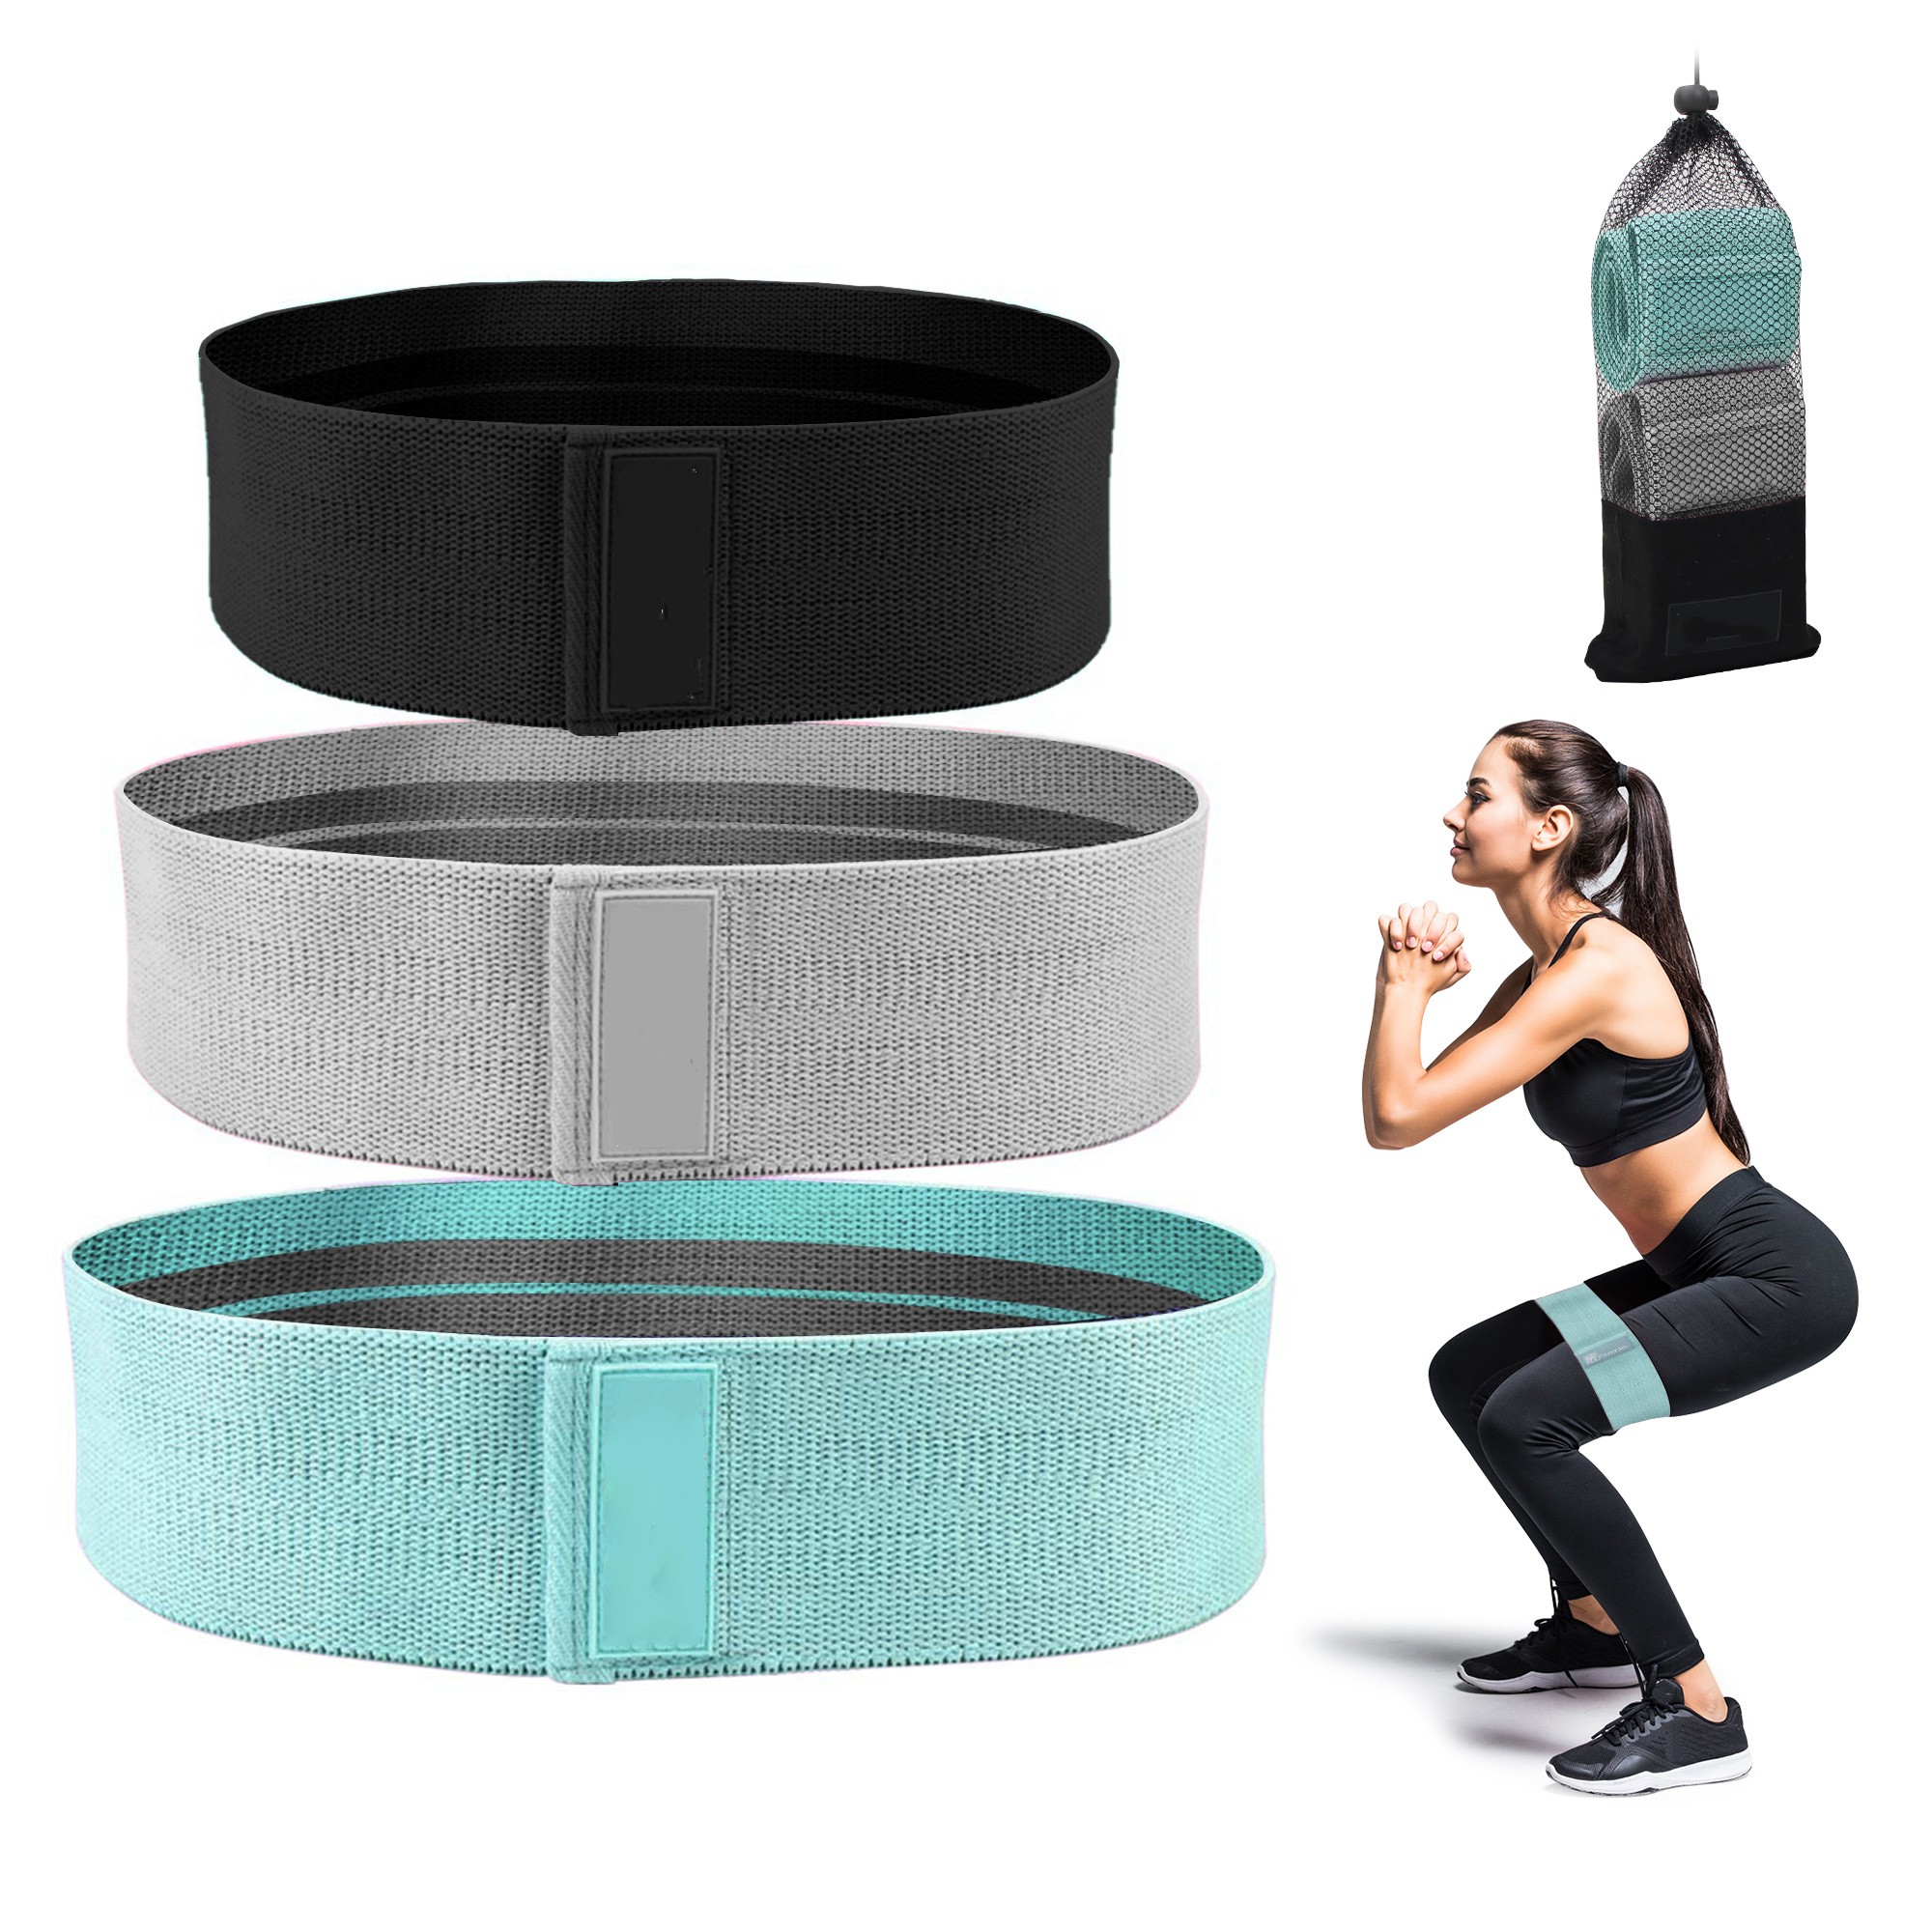 New Smart Bar Weight Plate - A Revolutionary Addition to Your Workout Routine